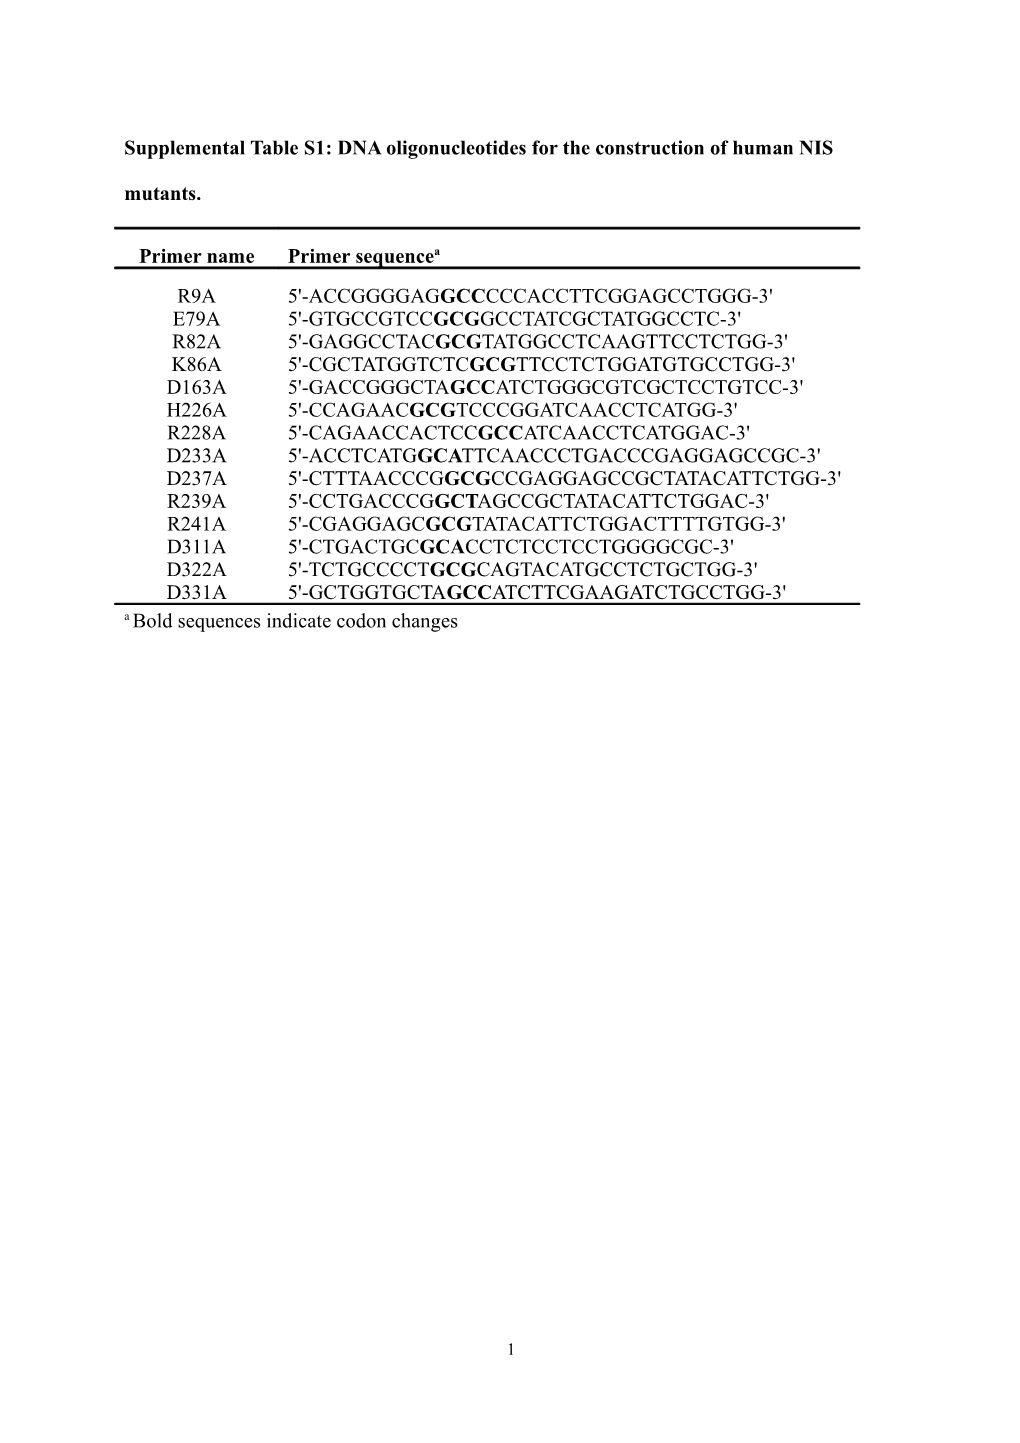 Supplemental Table S1: DNA Oligonucleotides for the Construction of Human NIS Mutants